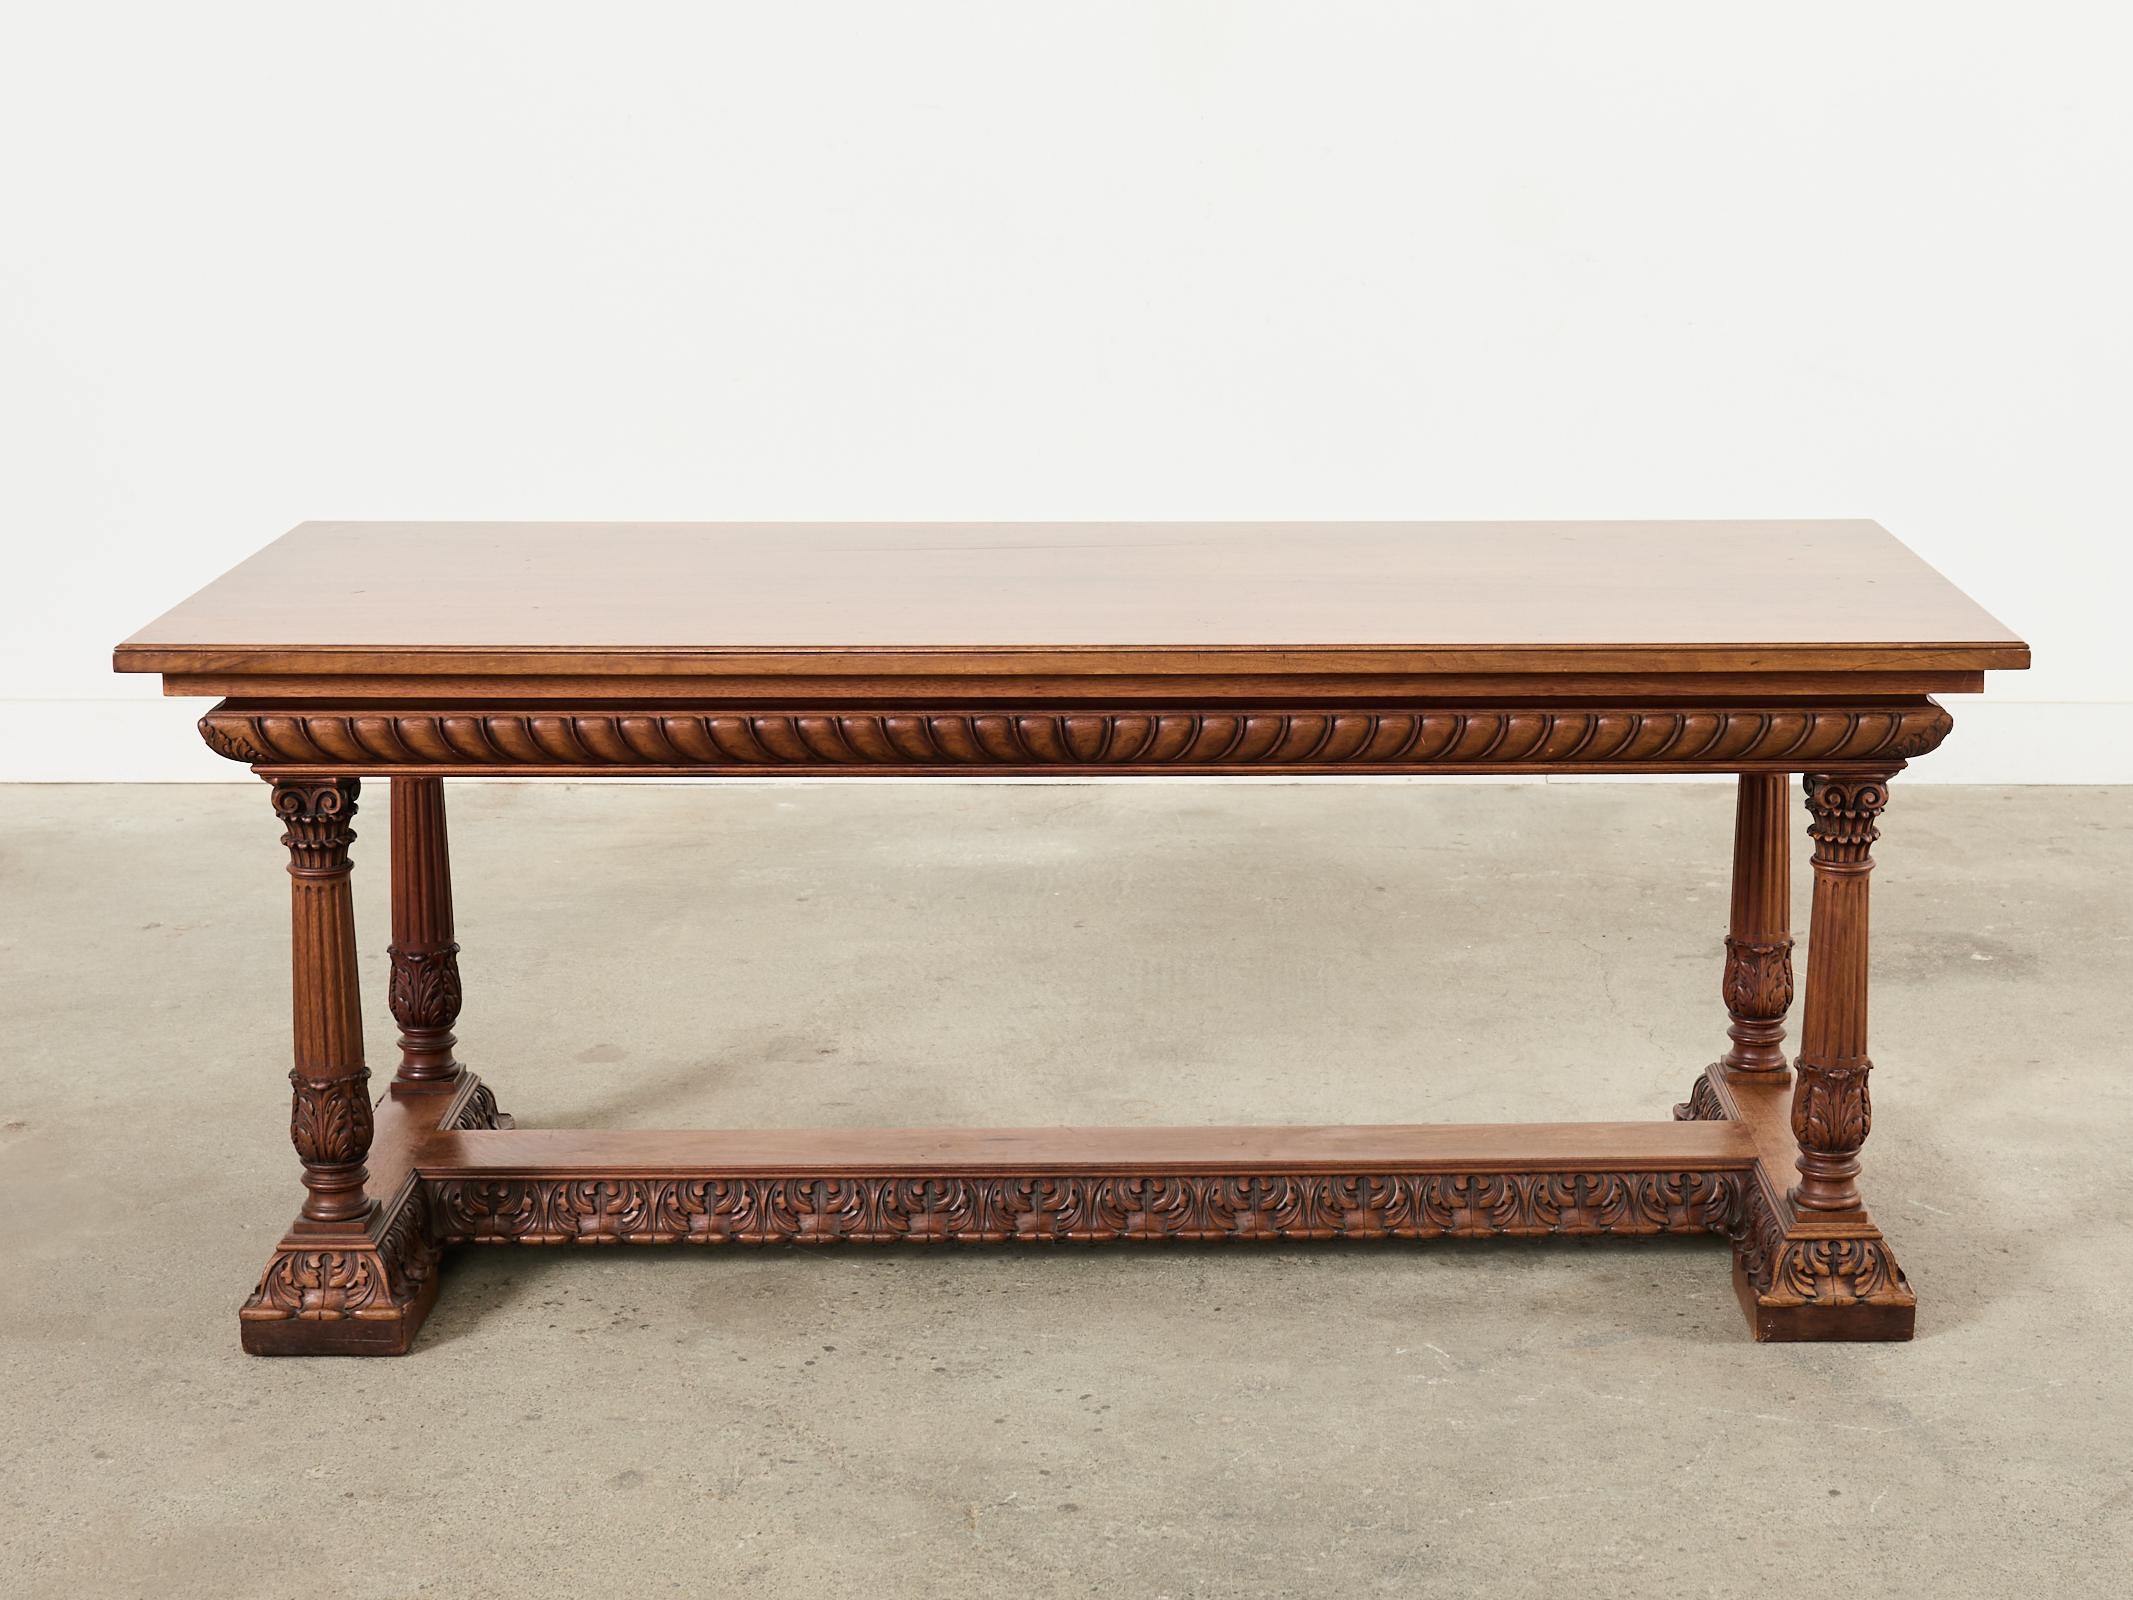 20th Century English Neoclassical Style Mahogany Library Table or Writing Table For Sale